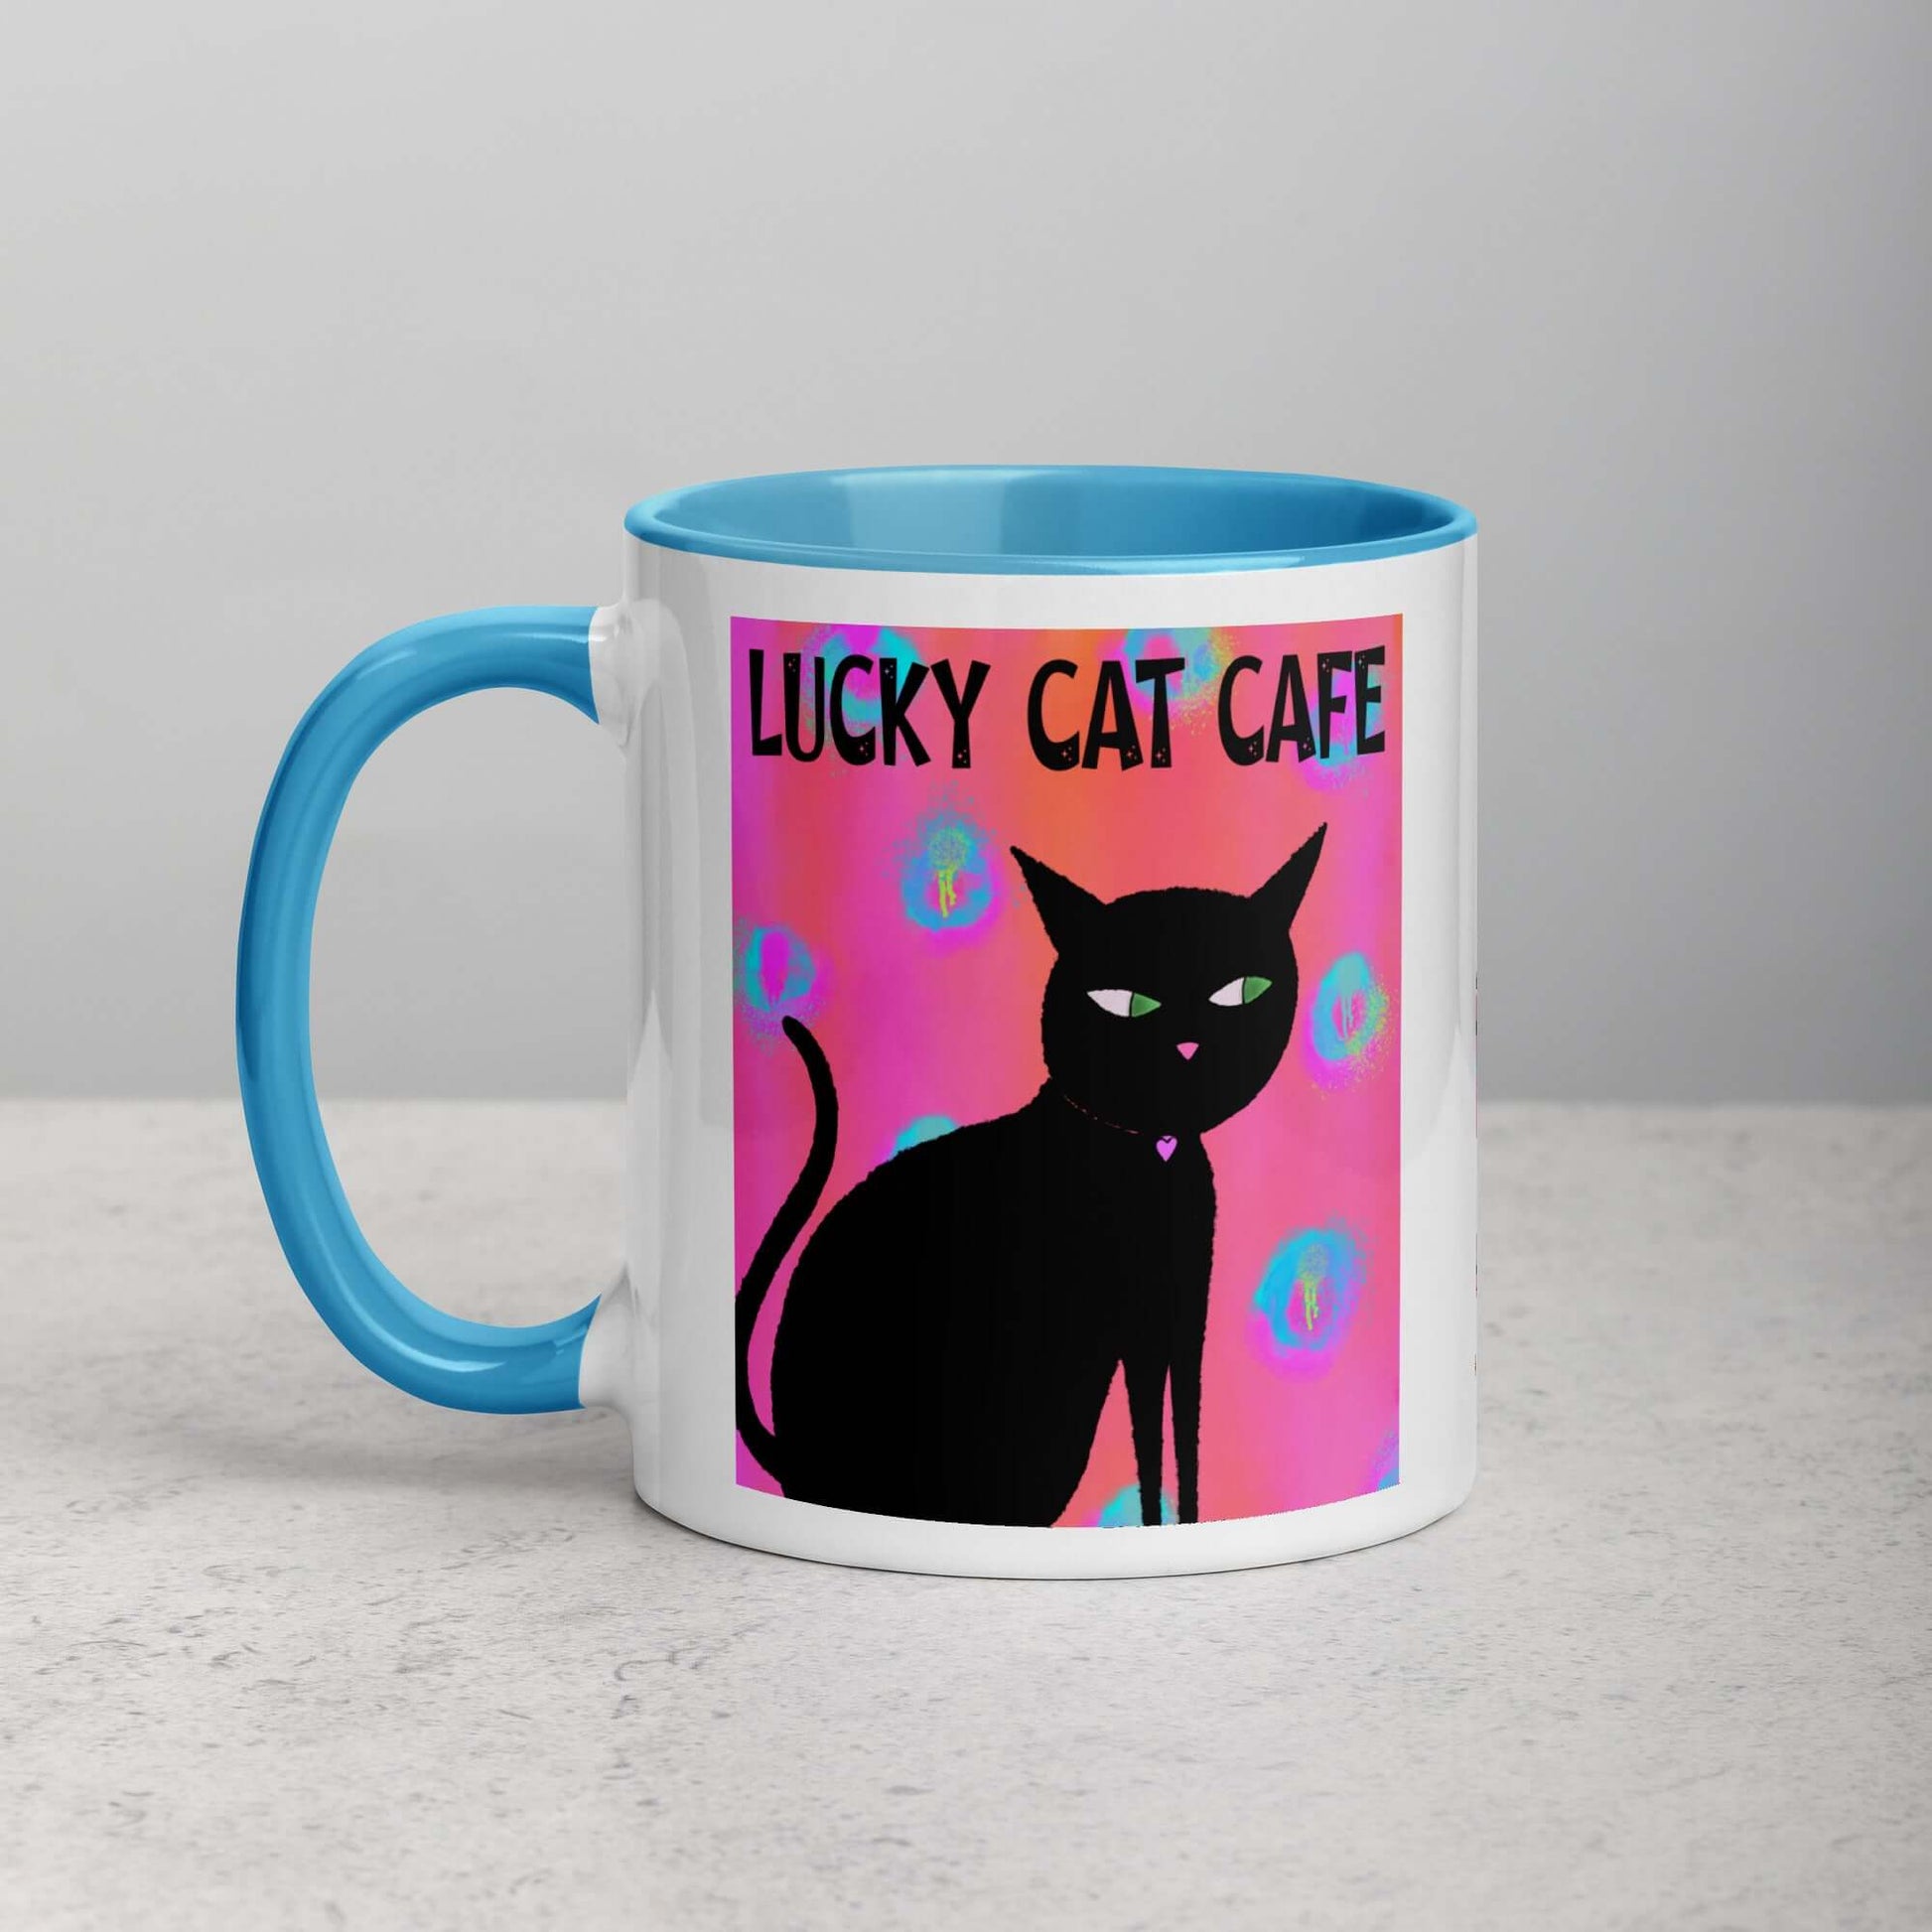 Black Cat on Hot Pink Tie Dye Background with Text “Lucky Cat Cafe” Mug with Light Blue Color Inside Left Handed Front View